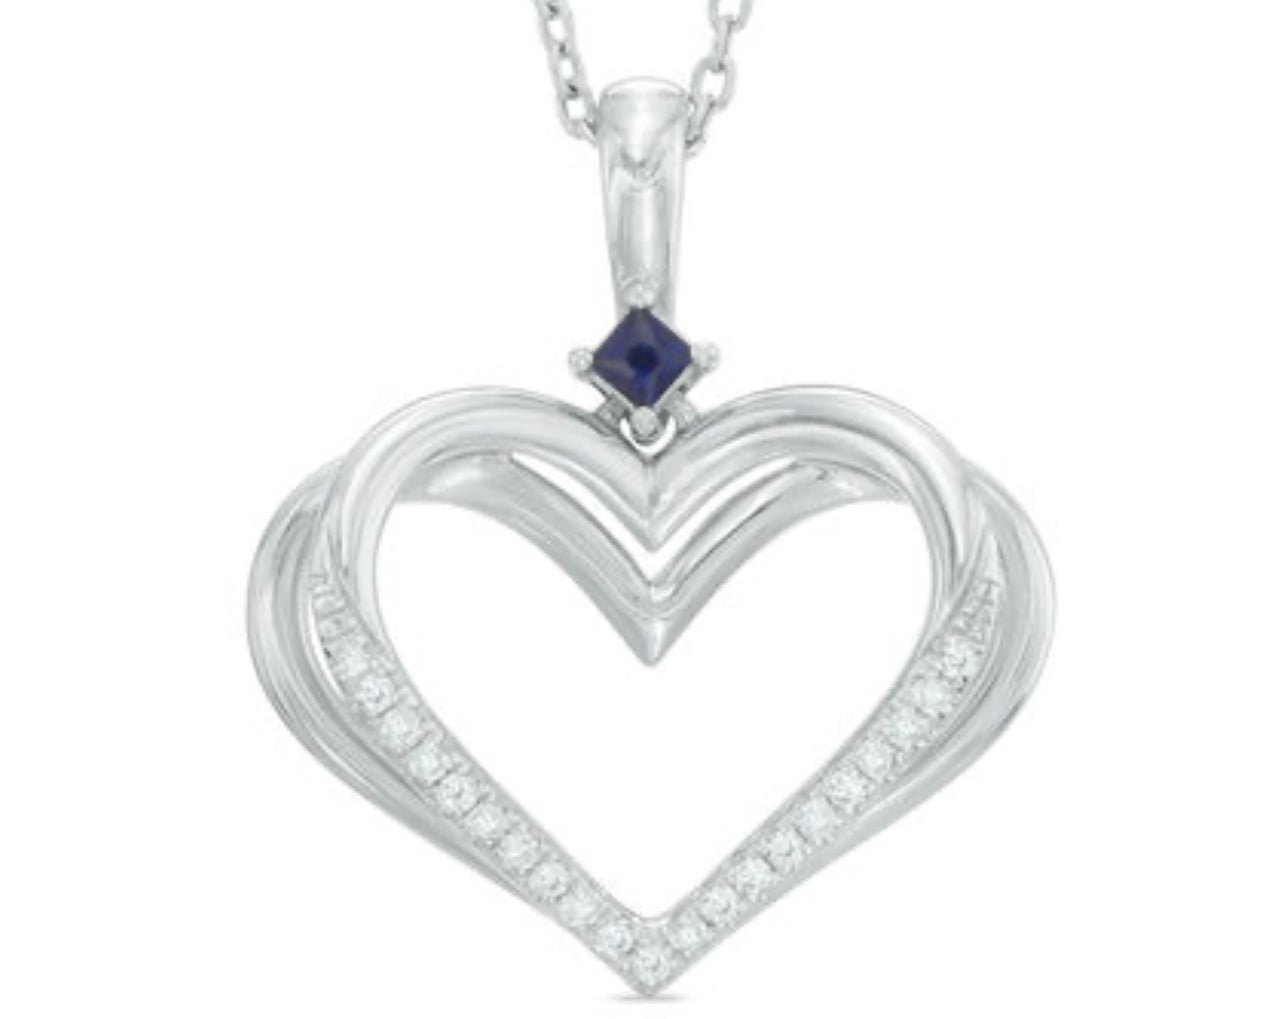 The Kindred Heart from Vera Wang Love Collection Diamond Accent and Blue Sapphire Pendant in Sterling Silver